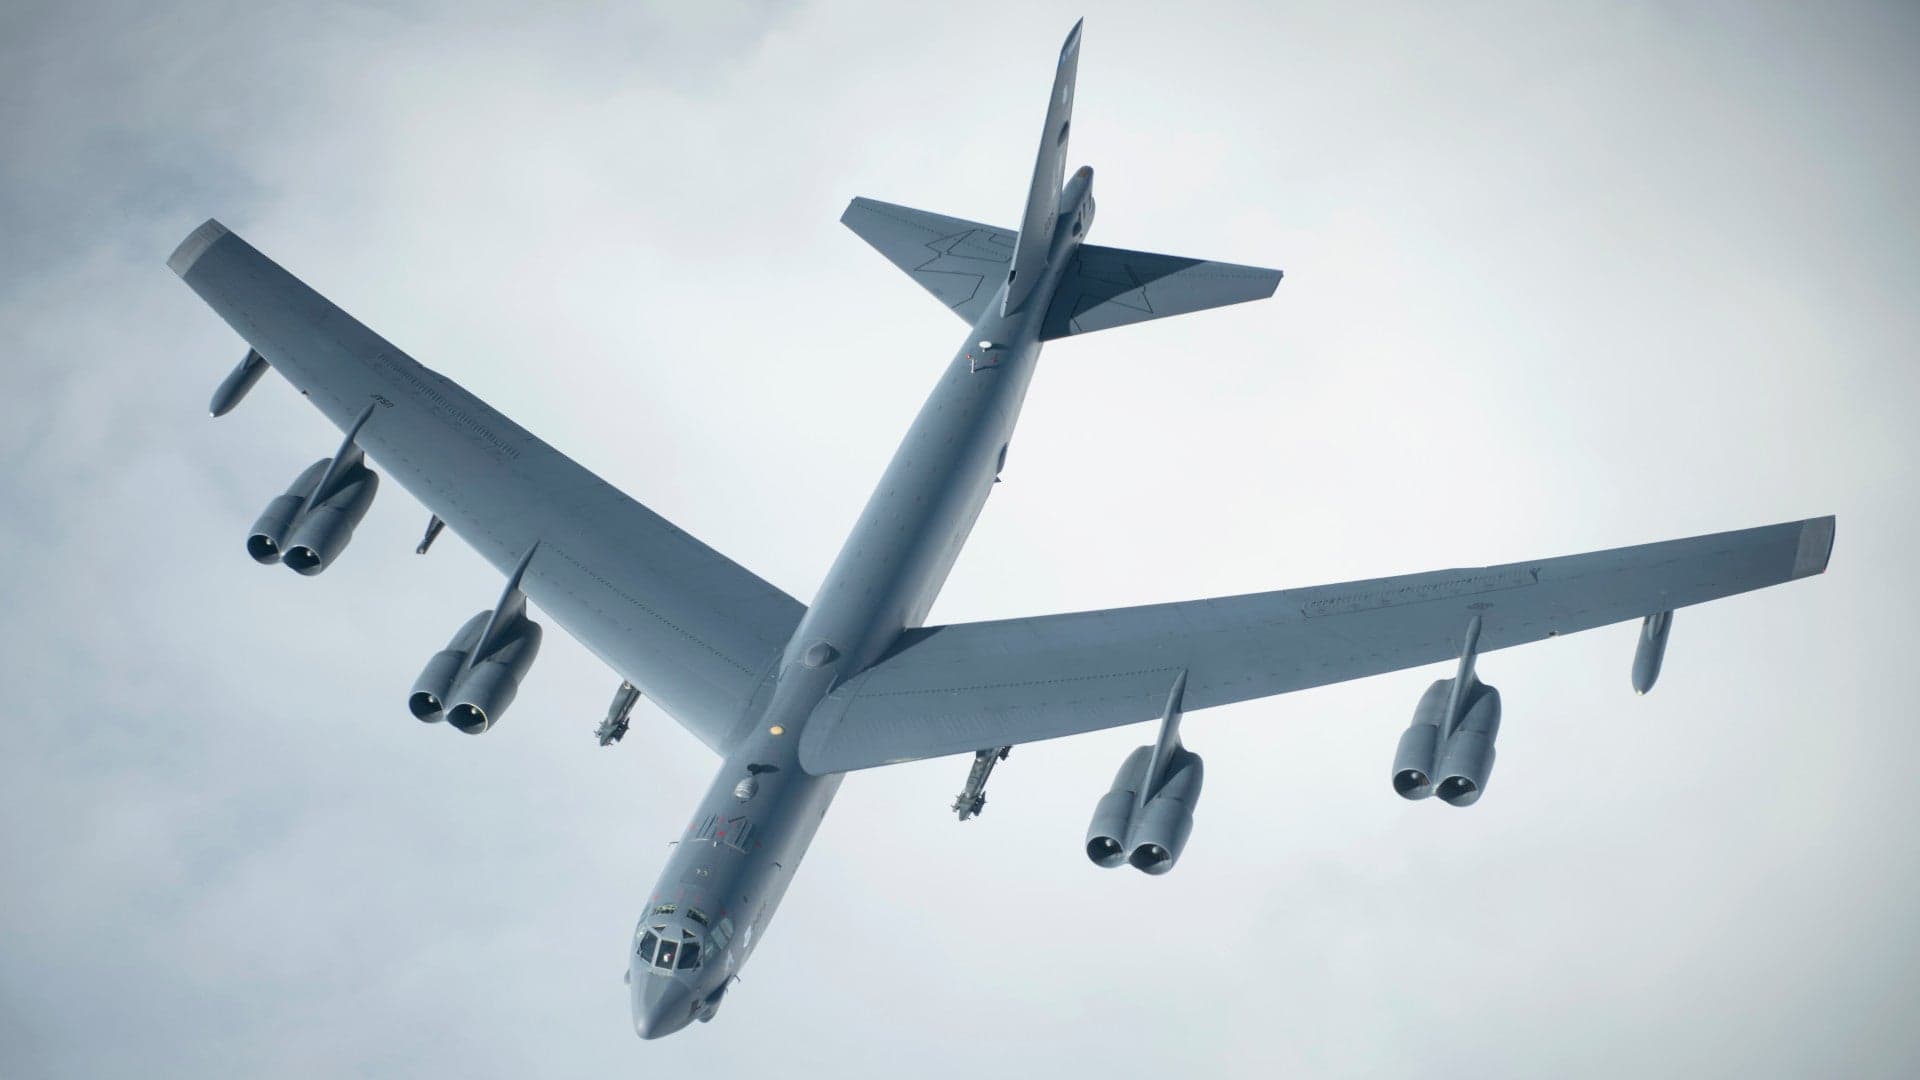 B-52 Bomber Flies For The First Time With New Hypersonic Missile Under Its Wing